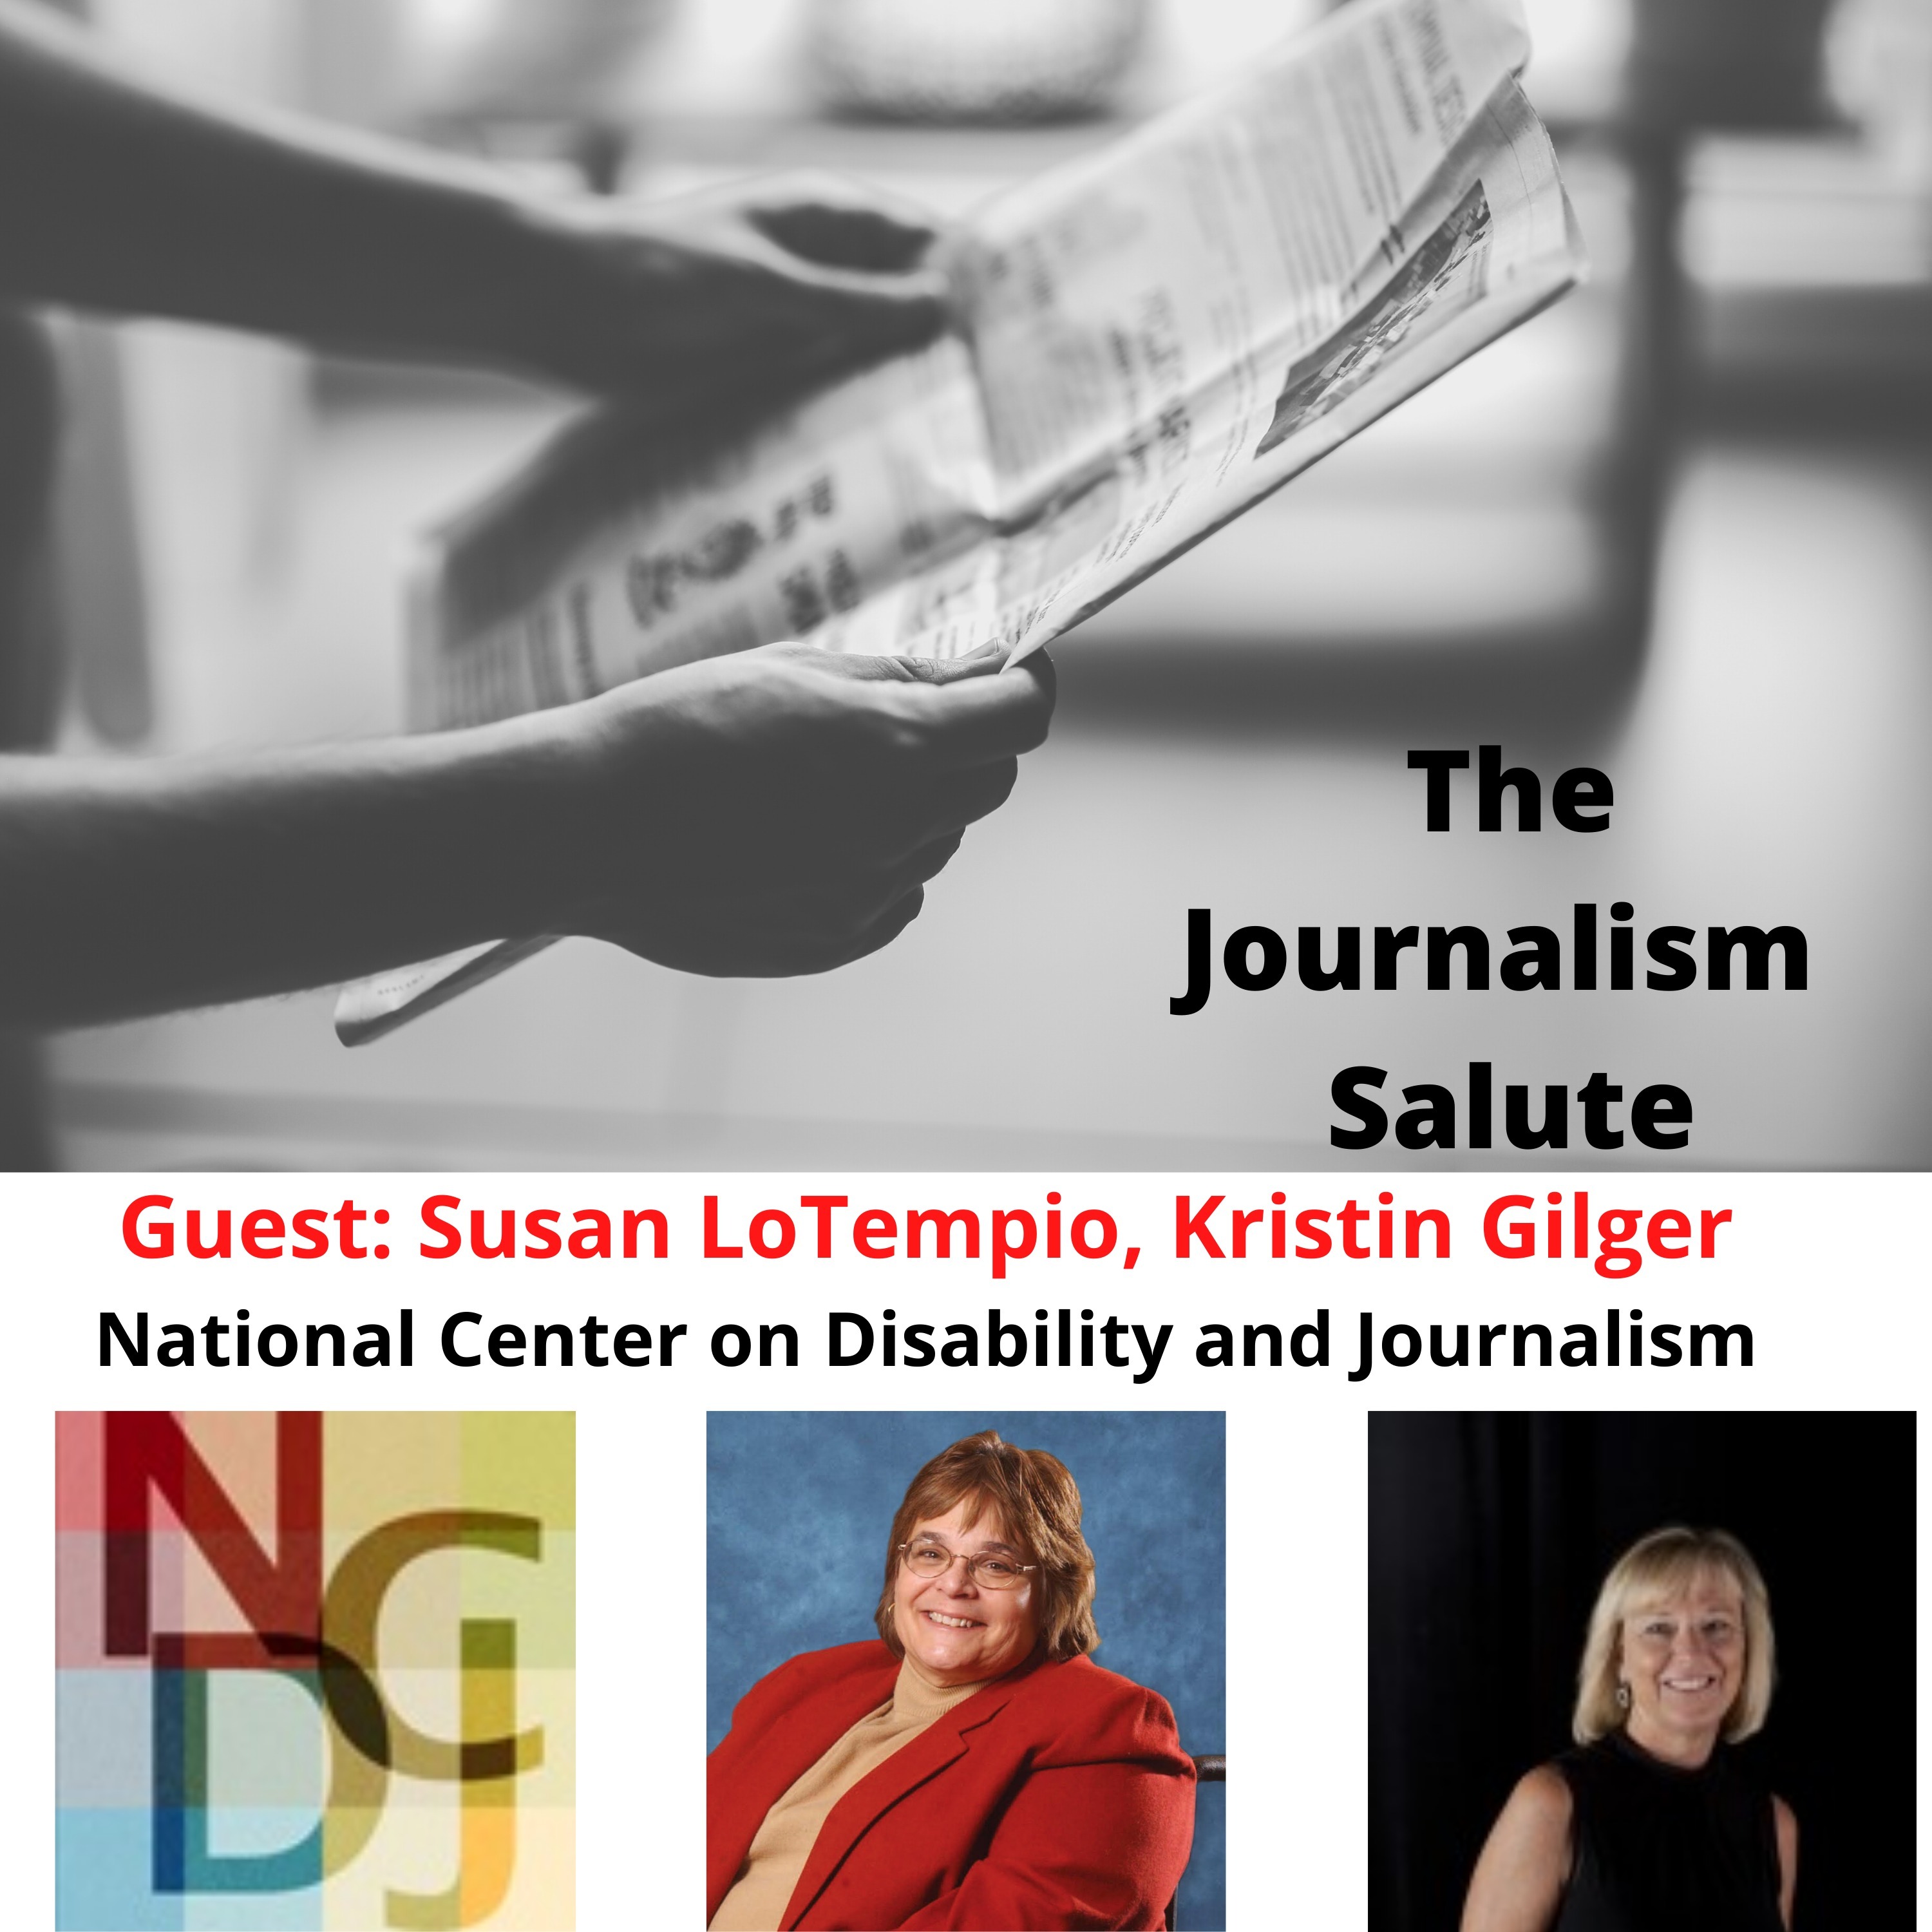 Susan LoTempio & Kristin Gilger from the National Center on Disability and Journalism